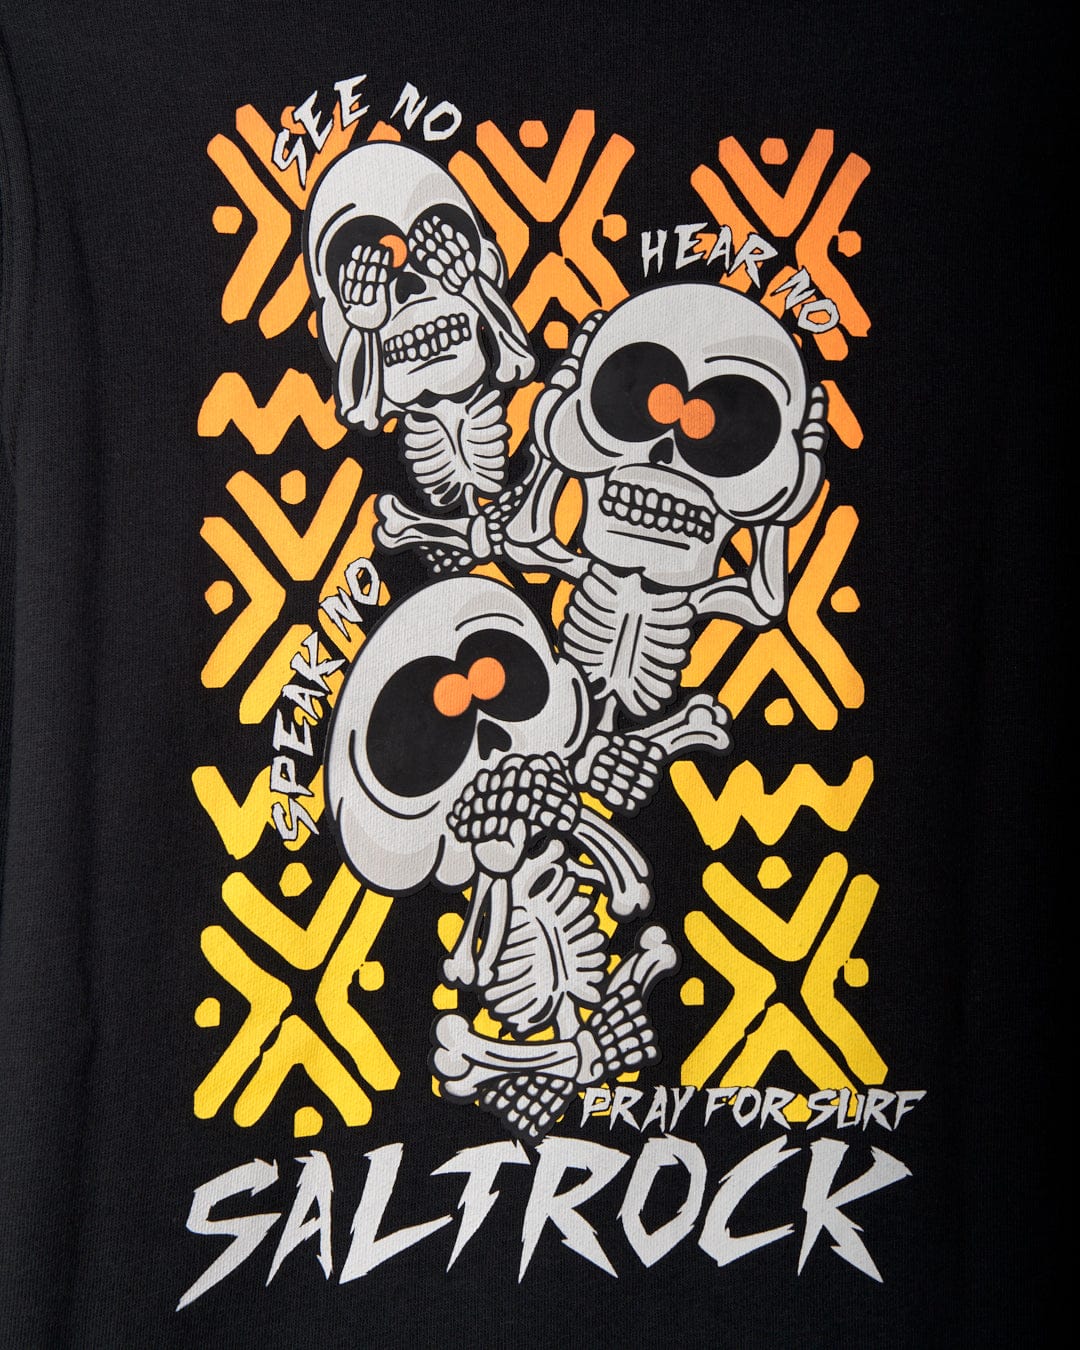 Illustration of the "see no evil, hear no evil, speak no evil" skeletons with "Pray for Surf" and "Saltrock branding" written below them on a black background with yellow and orange geometric patterns. The design also features a kangaroo pocket crafted from recycled materials, seen on the Saltrock See No Skulls - Kids Recycled Pop Hoodie - Black.